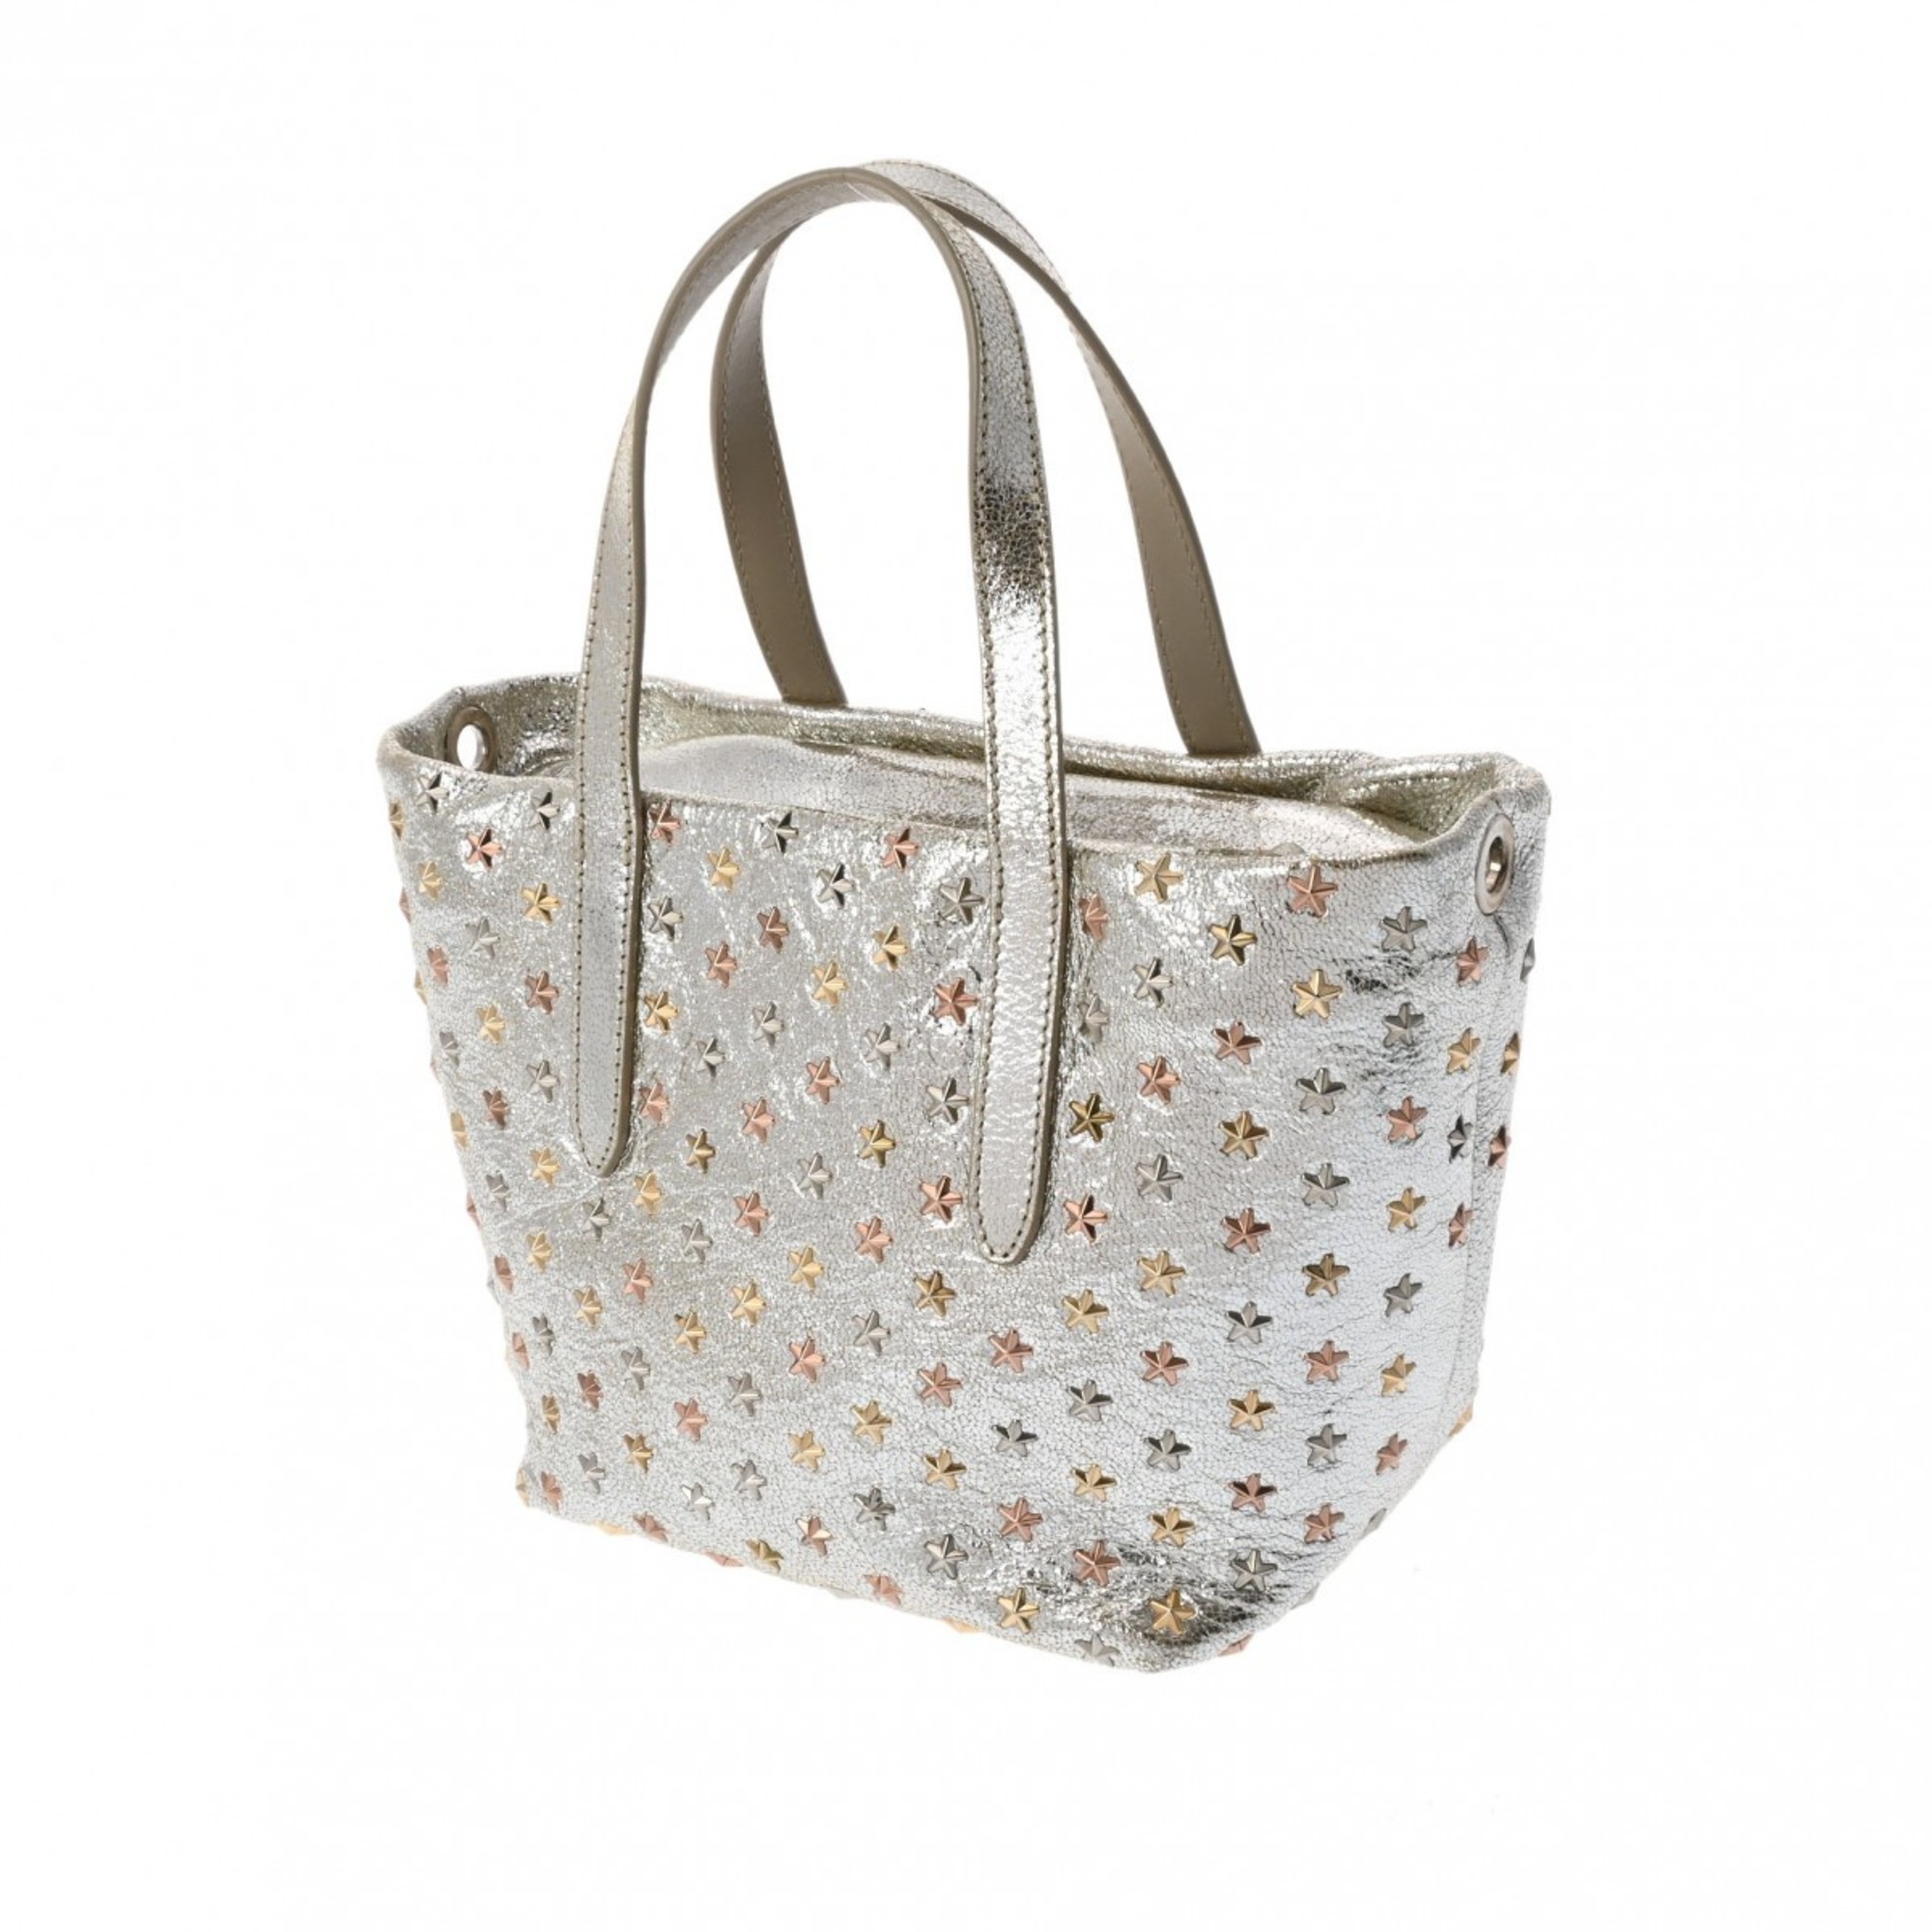 JIMMY CHOO Sarah Star Studded Silver Women's Leather Tote Bag